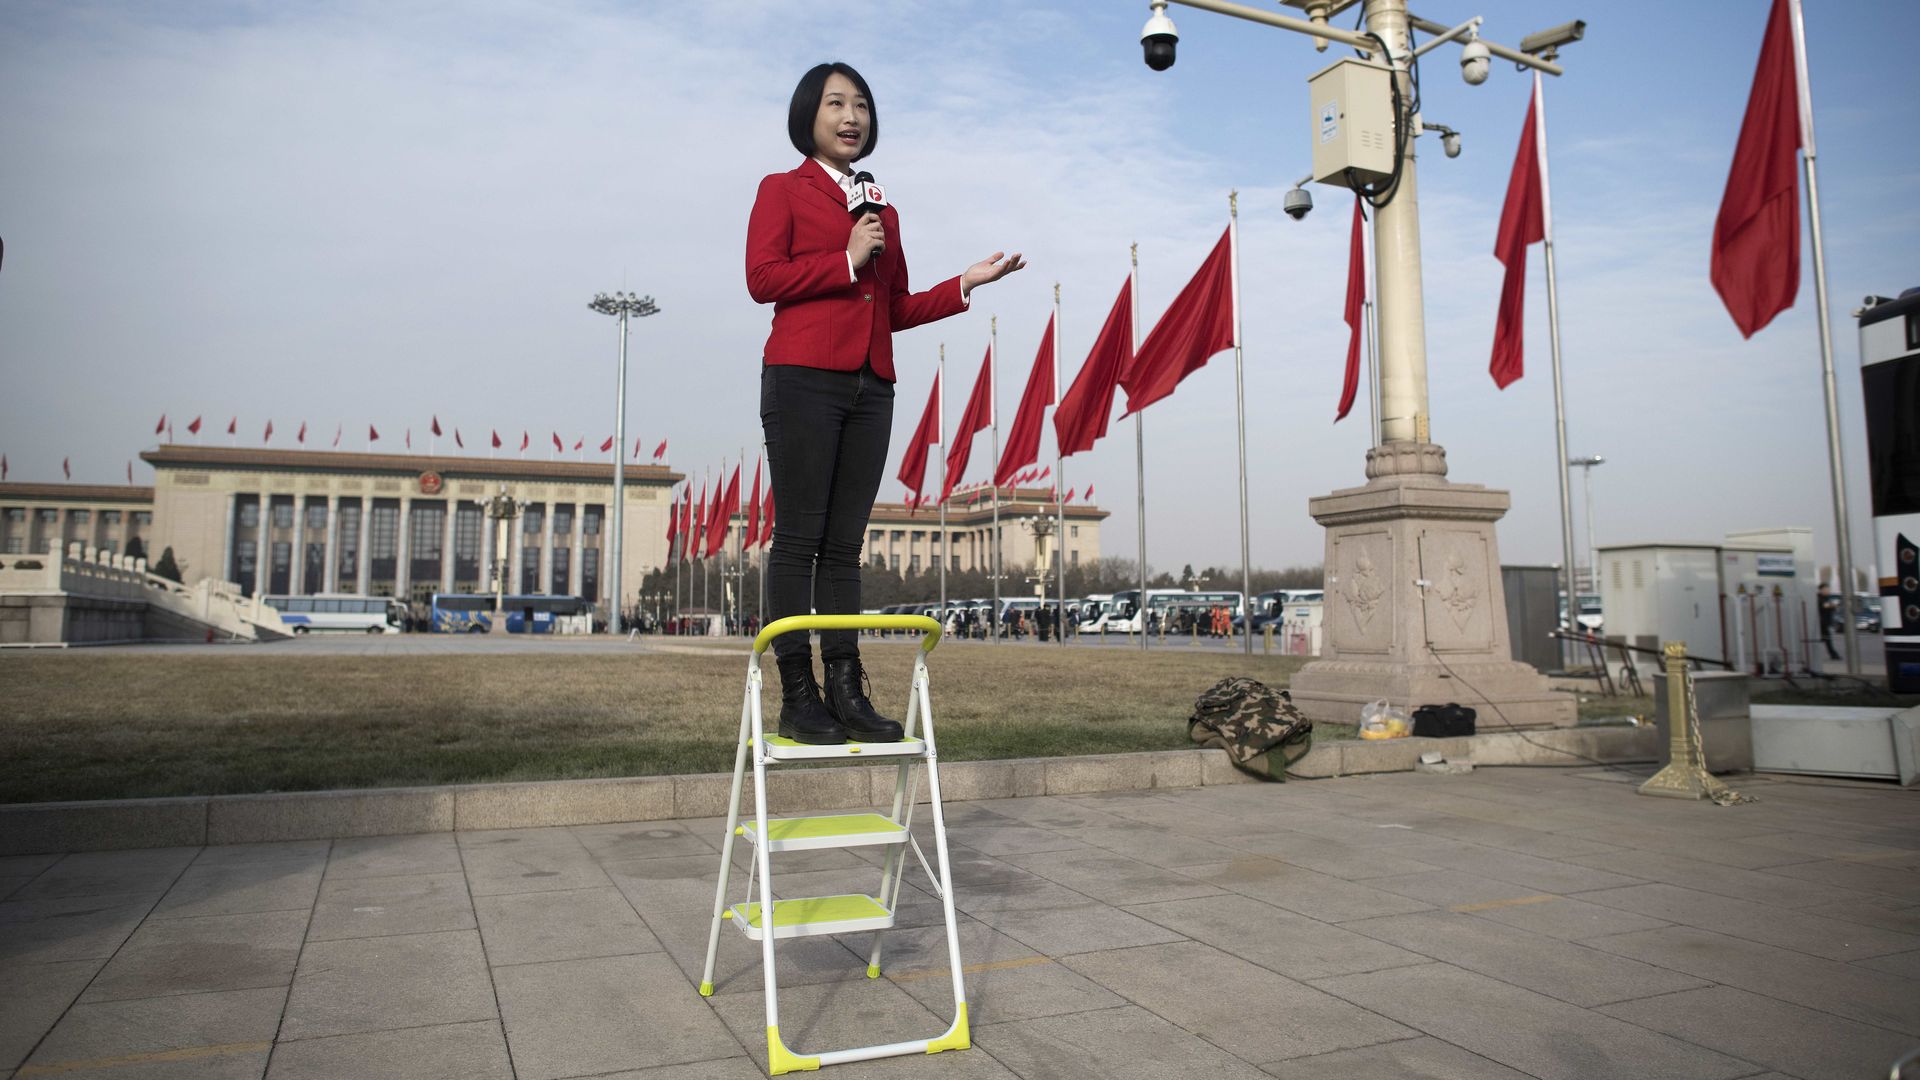 Chinese female journalist standing on step-ladder giving a television presentation